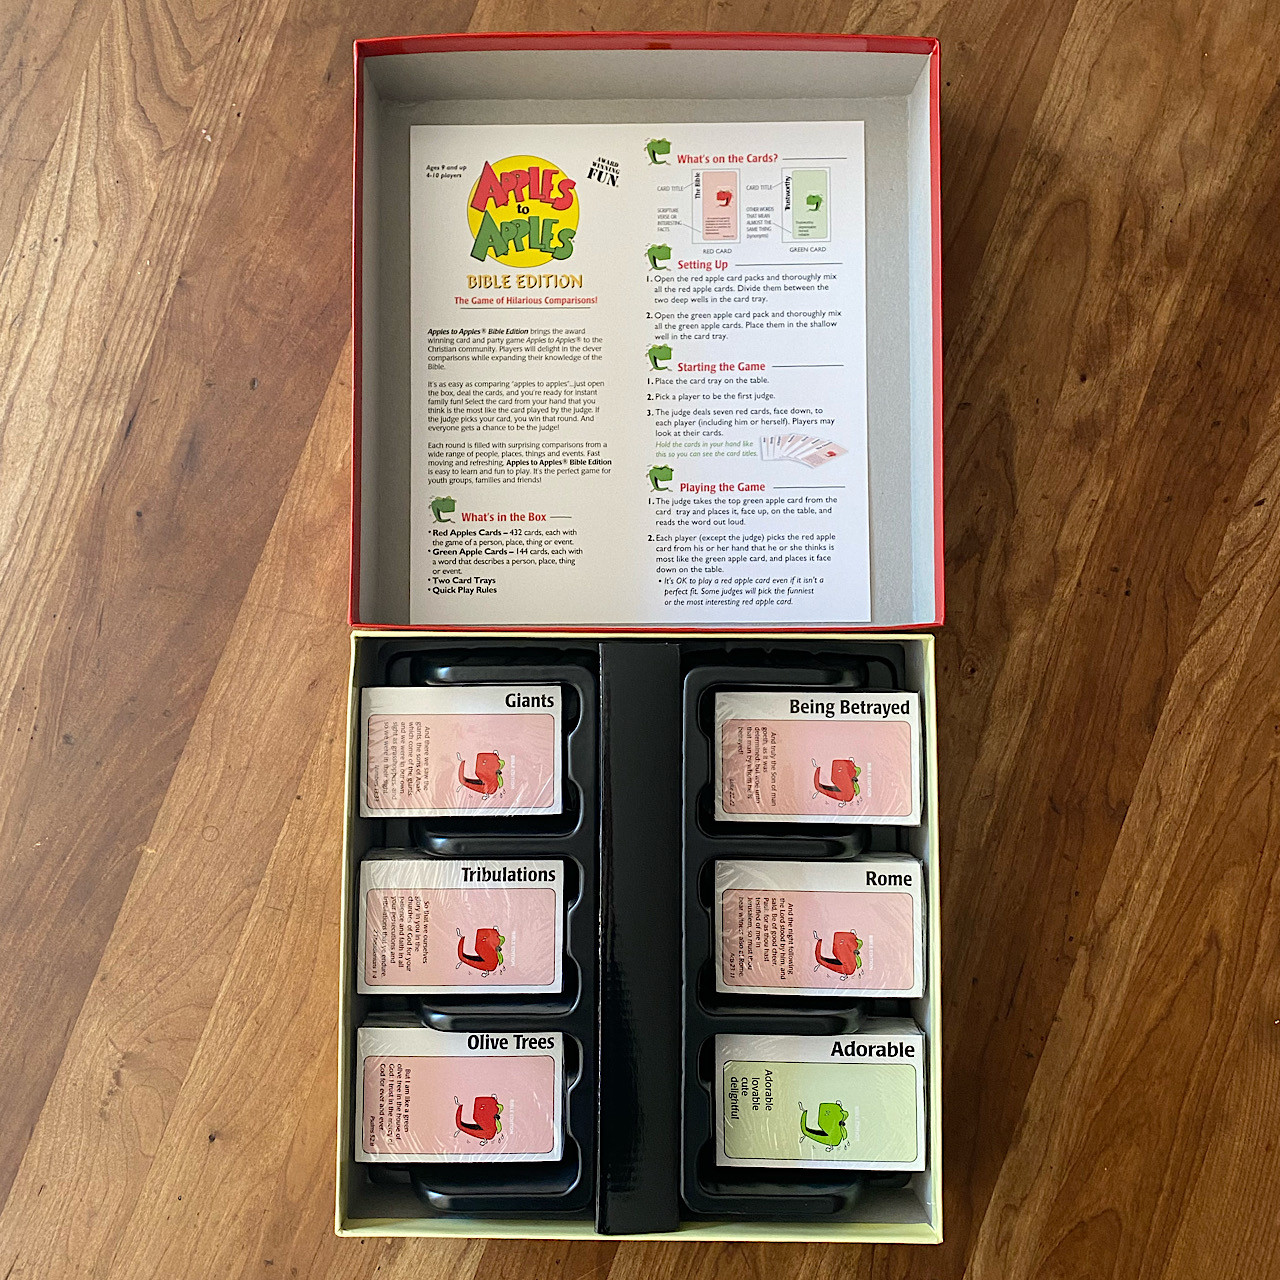 Inside the box of the Apples to Apples Bible Edition Game